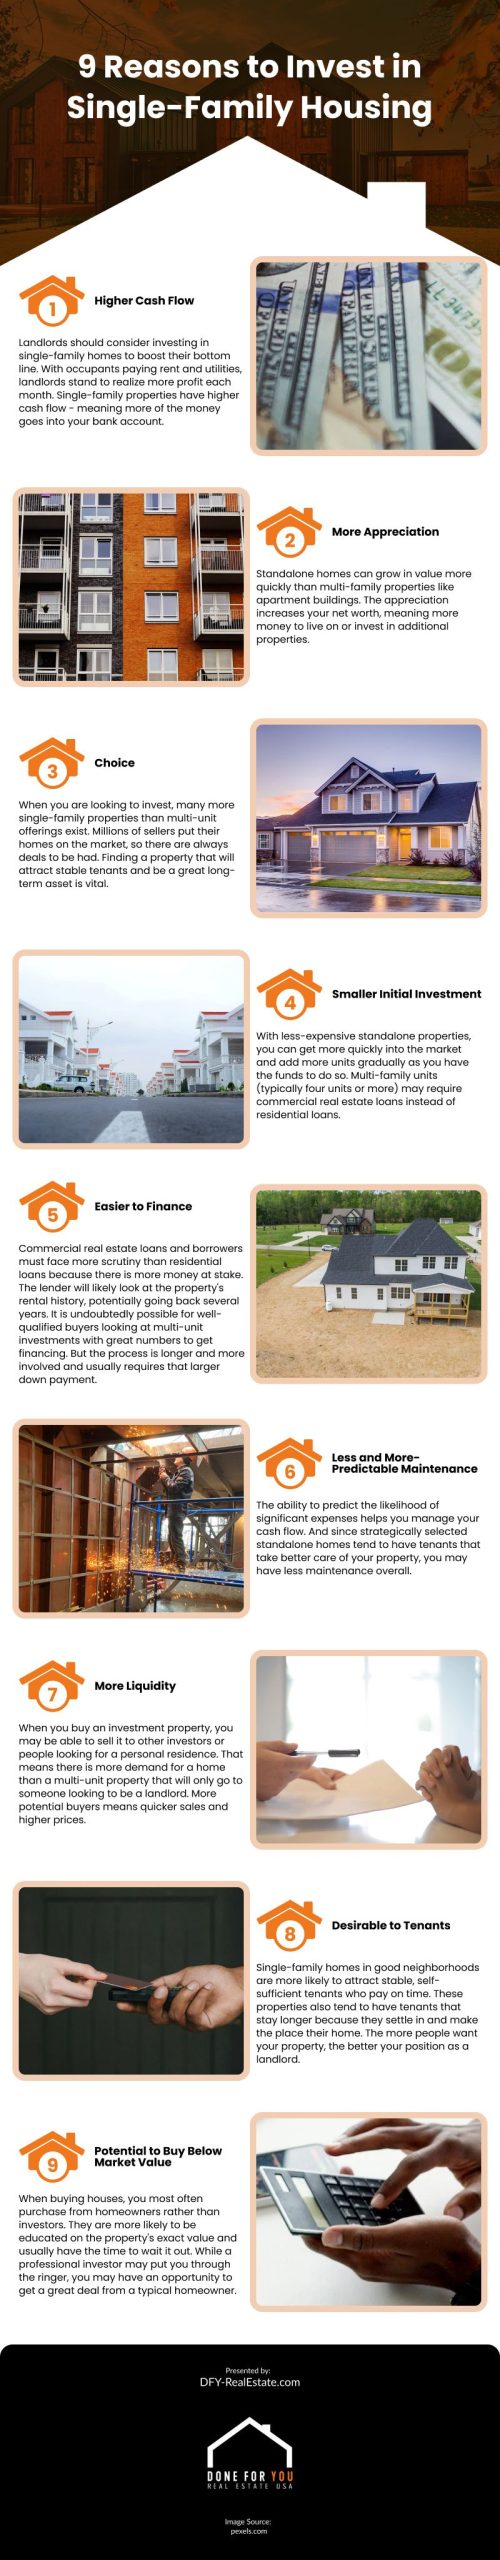 9 Reasons to Invest in Single-Family Housing Infographic